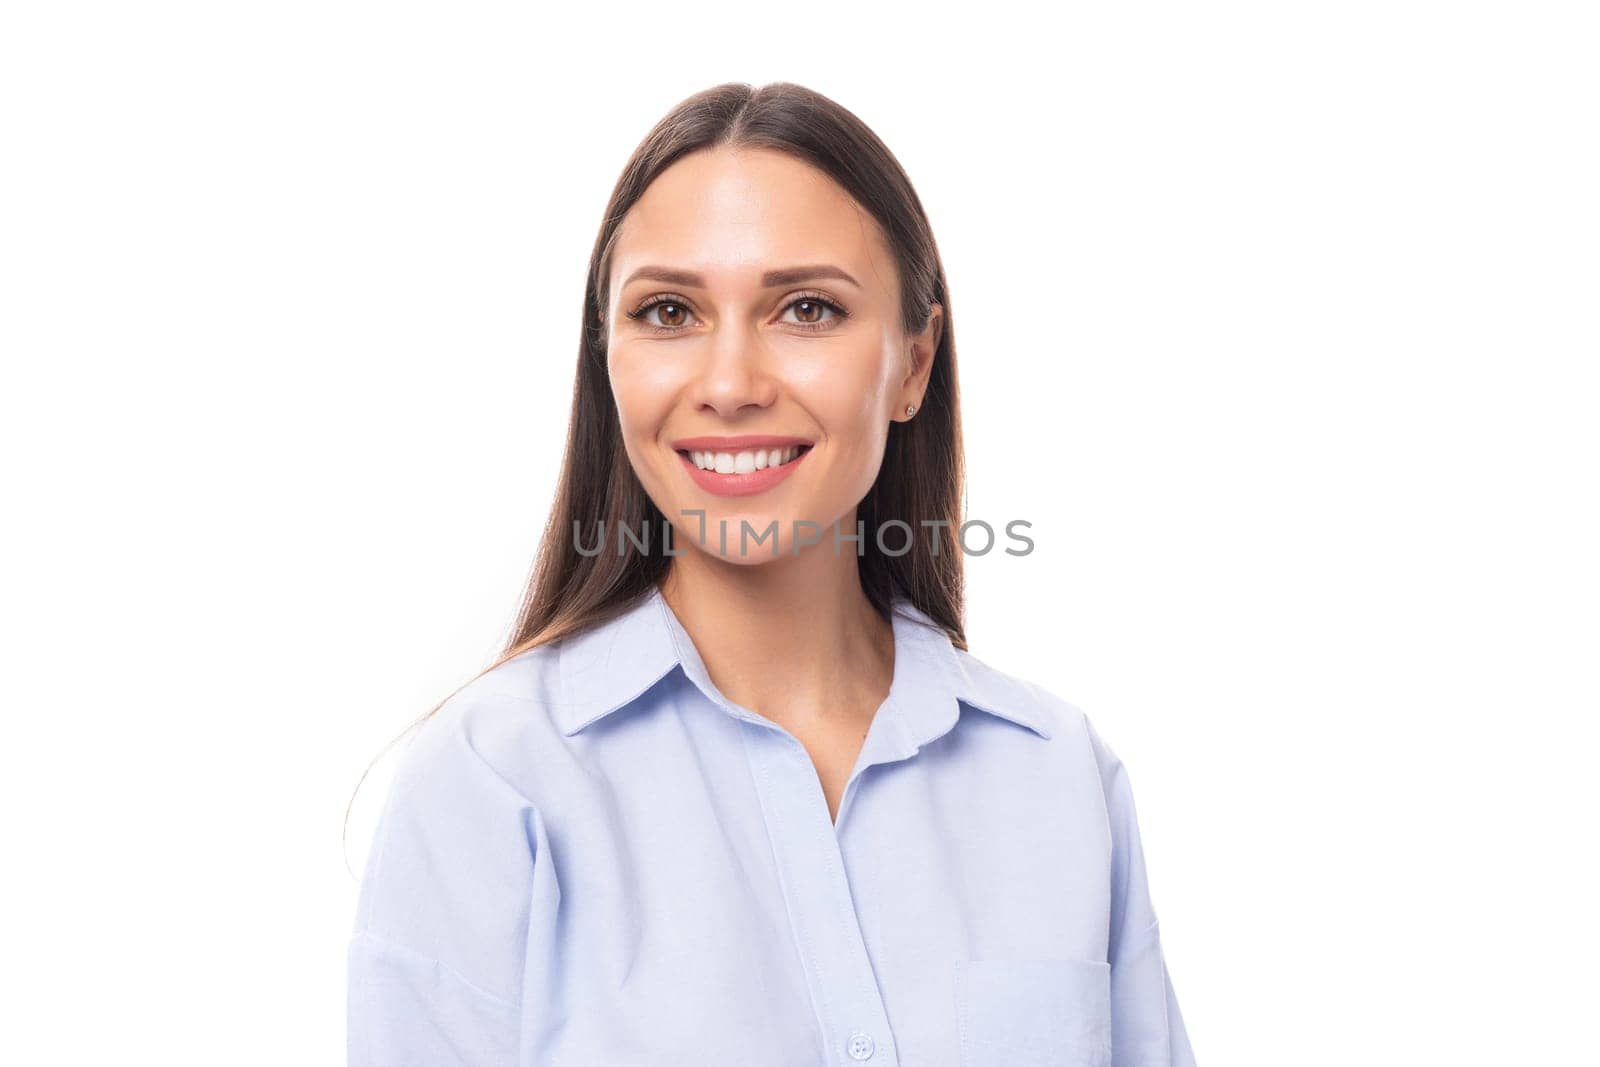 portrait of a young caucasian model woman with light makeup and dark straight hair dressed in a blue blouse on a white background with copy space.